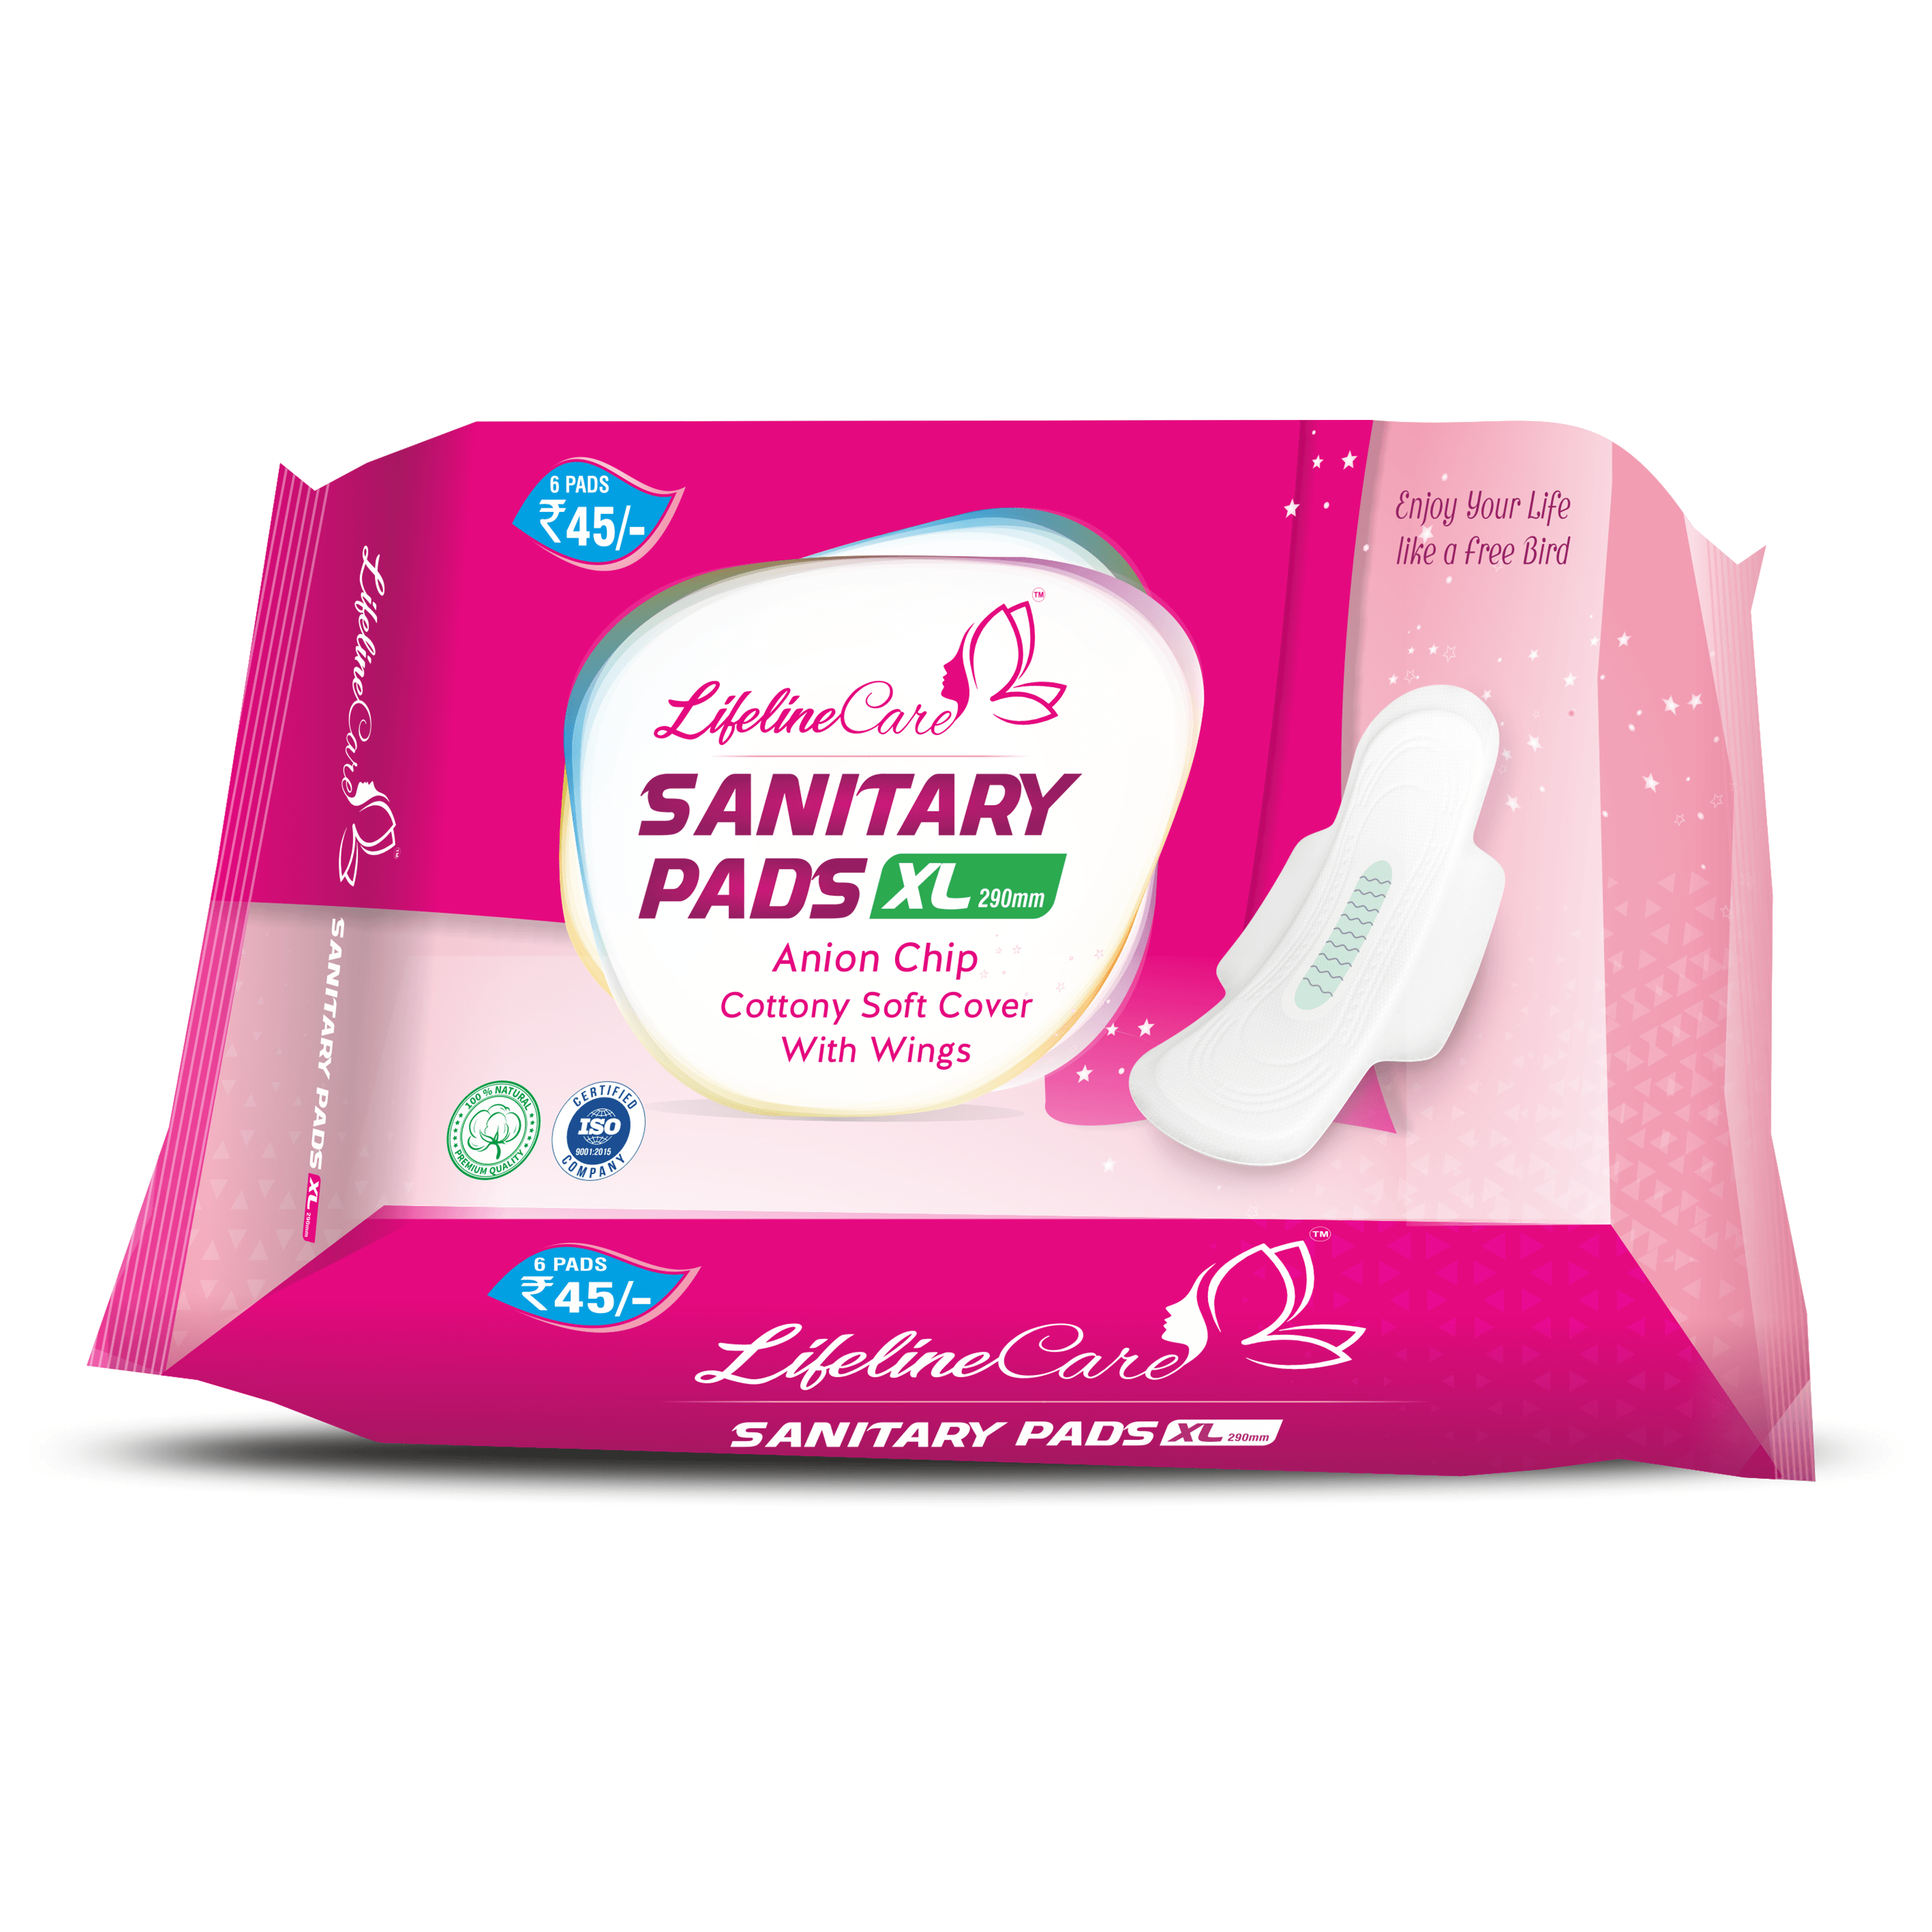 Lifeline Care Sanitary Pads XL Front Image